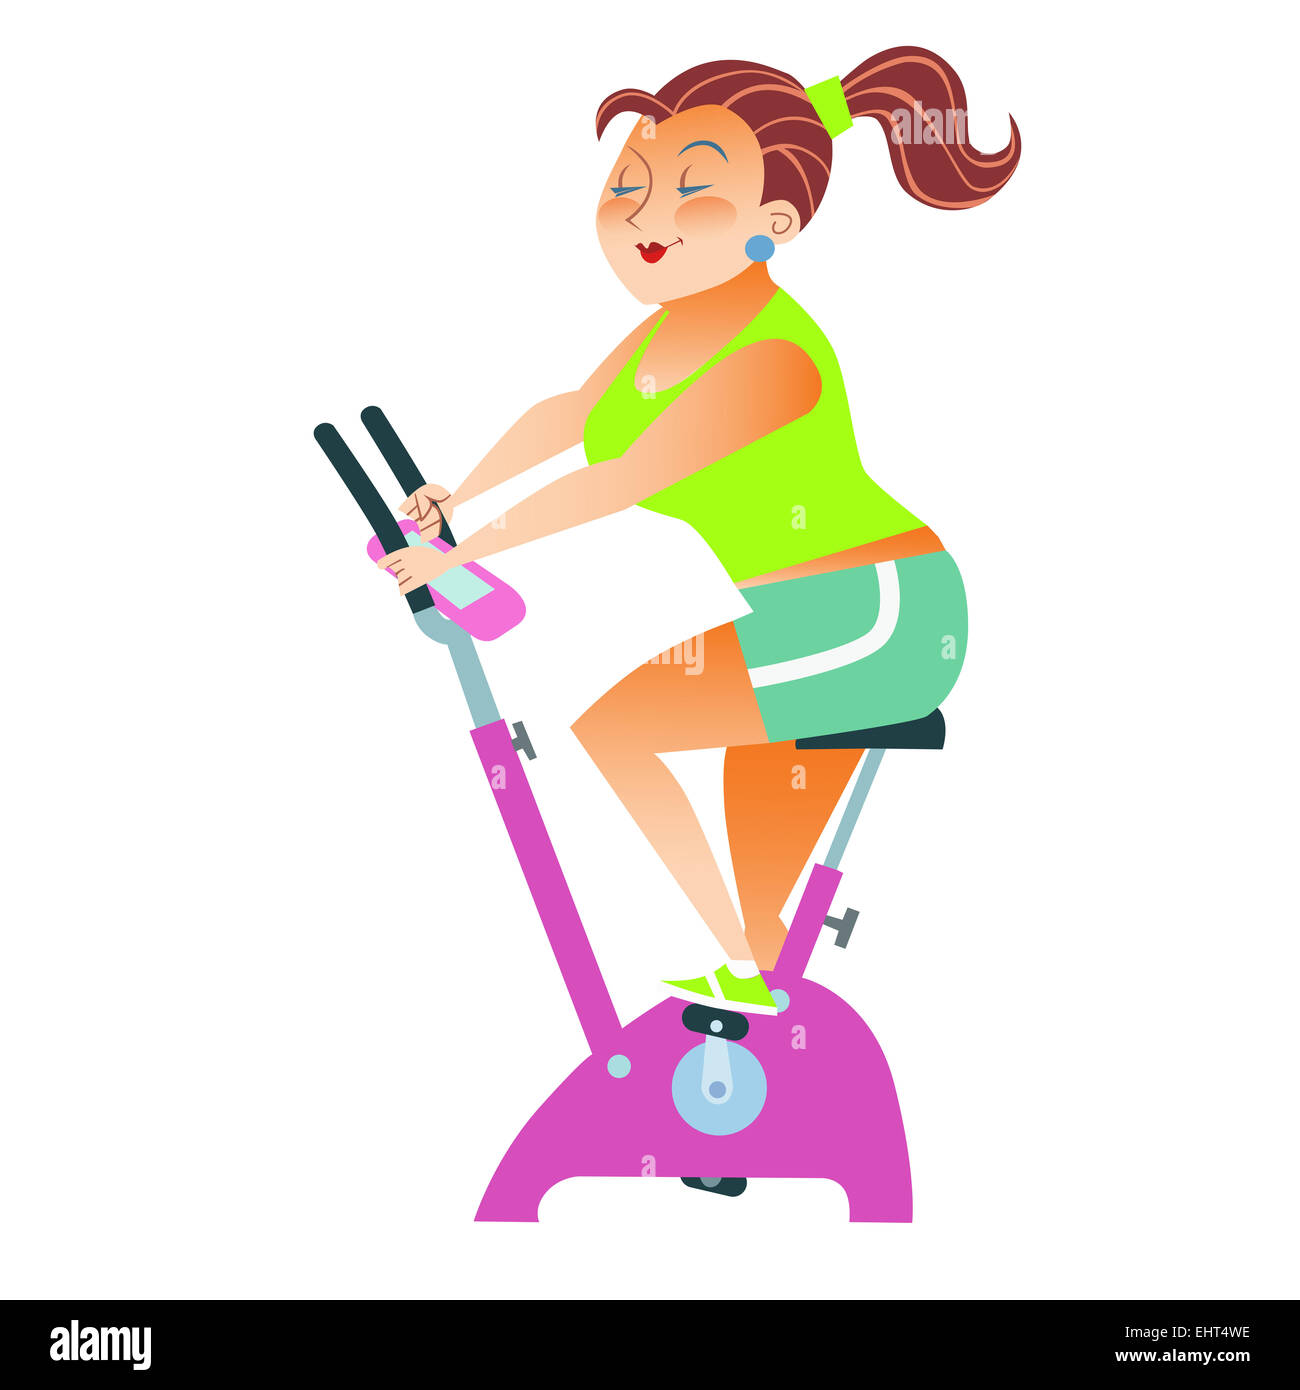 The girl with more weight training on a stationary bike Stock Photo